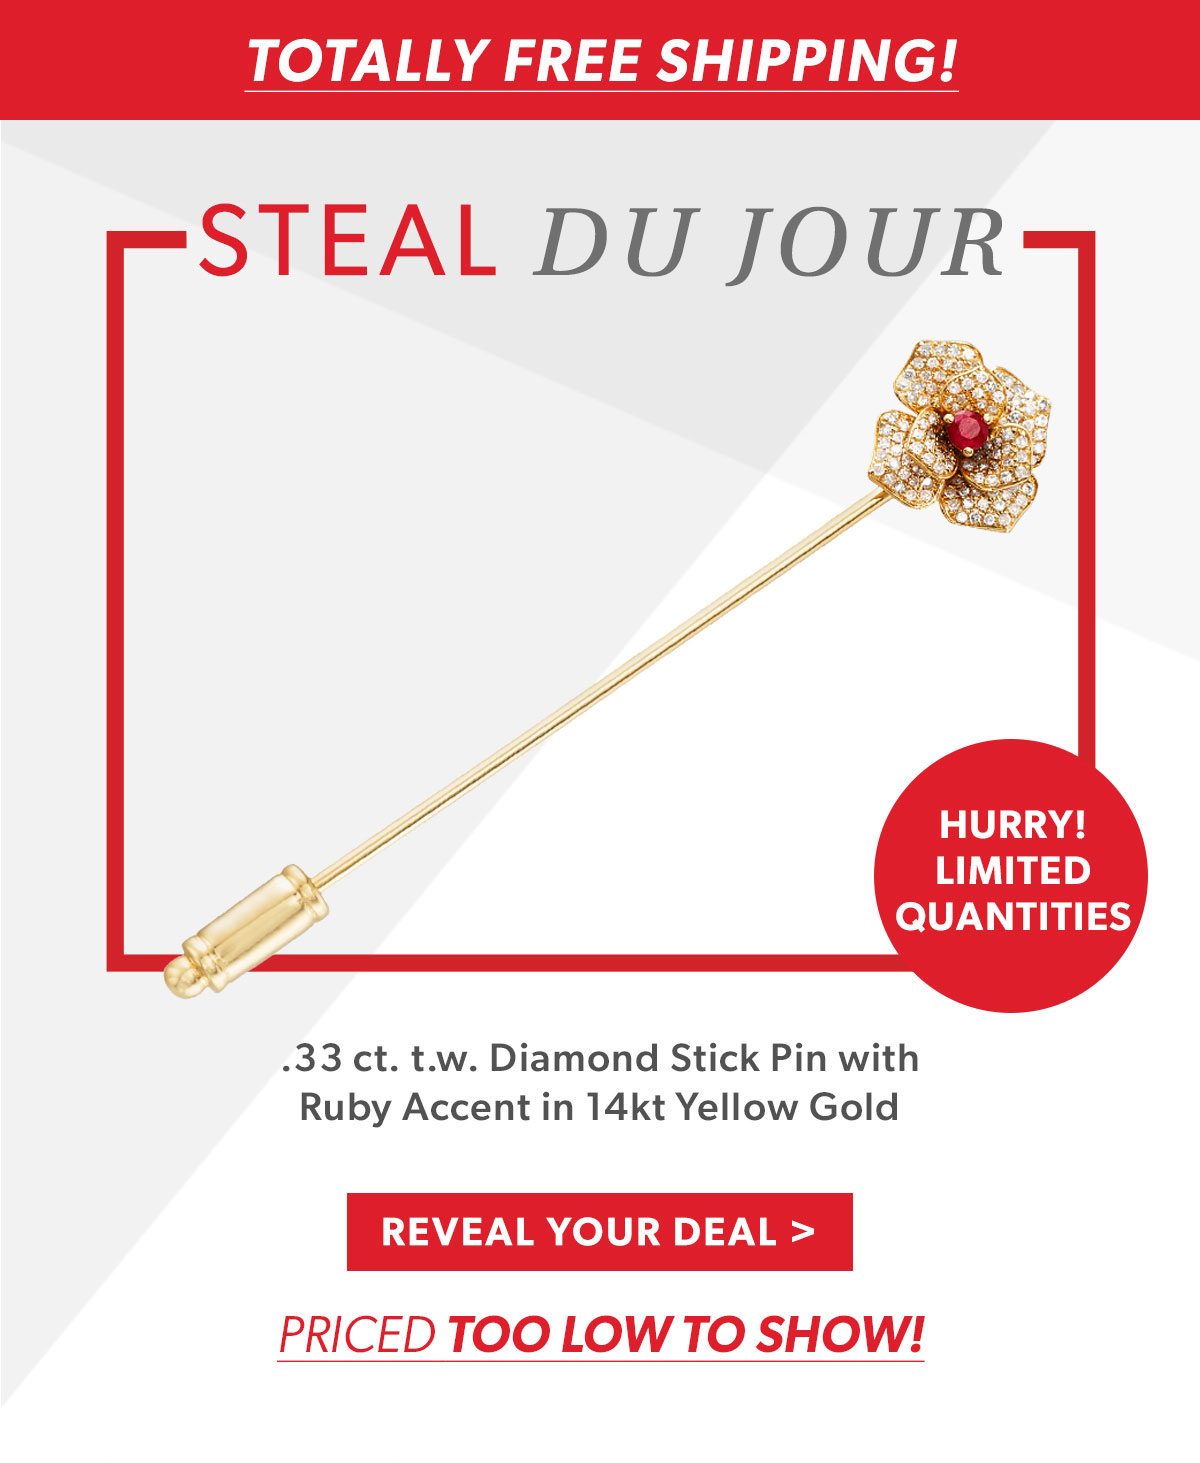 Totally Free Shipping! Steal Du Jour. .33 ct. t.w. Diamond Stick Pin With Ruby Accent in 14kt Yellow Gold. Reveal Your Deal.